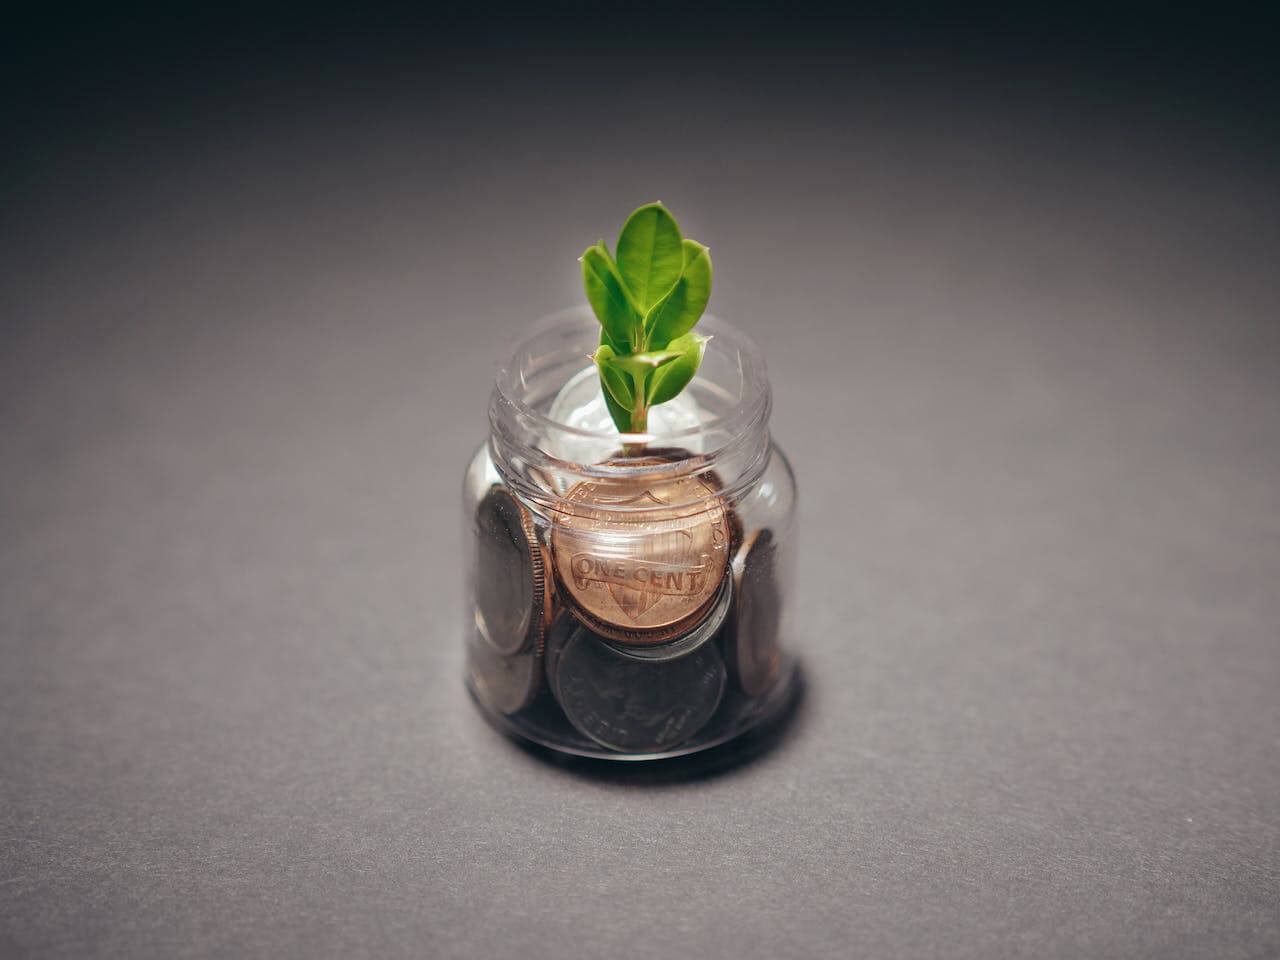 Photo by Kindel Media: https://www.pexels.com/photo/plant-on-a-glass-bottle-with-coins-6774947/